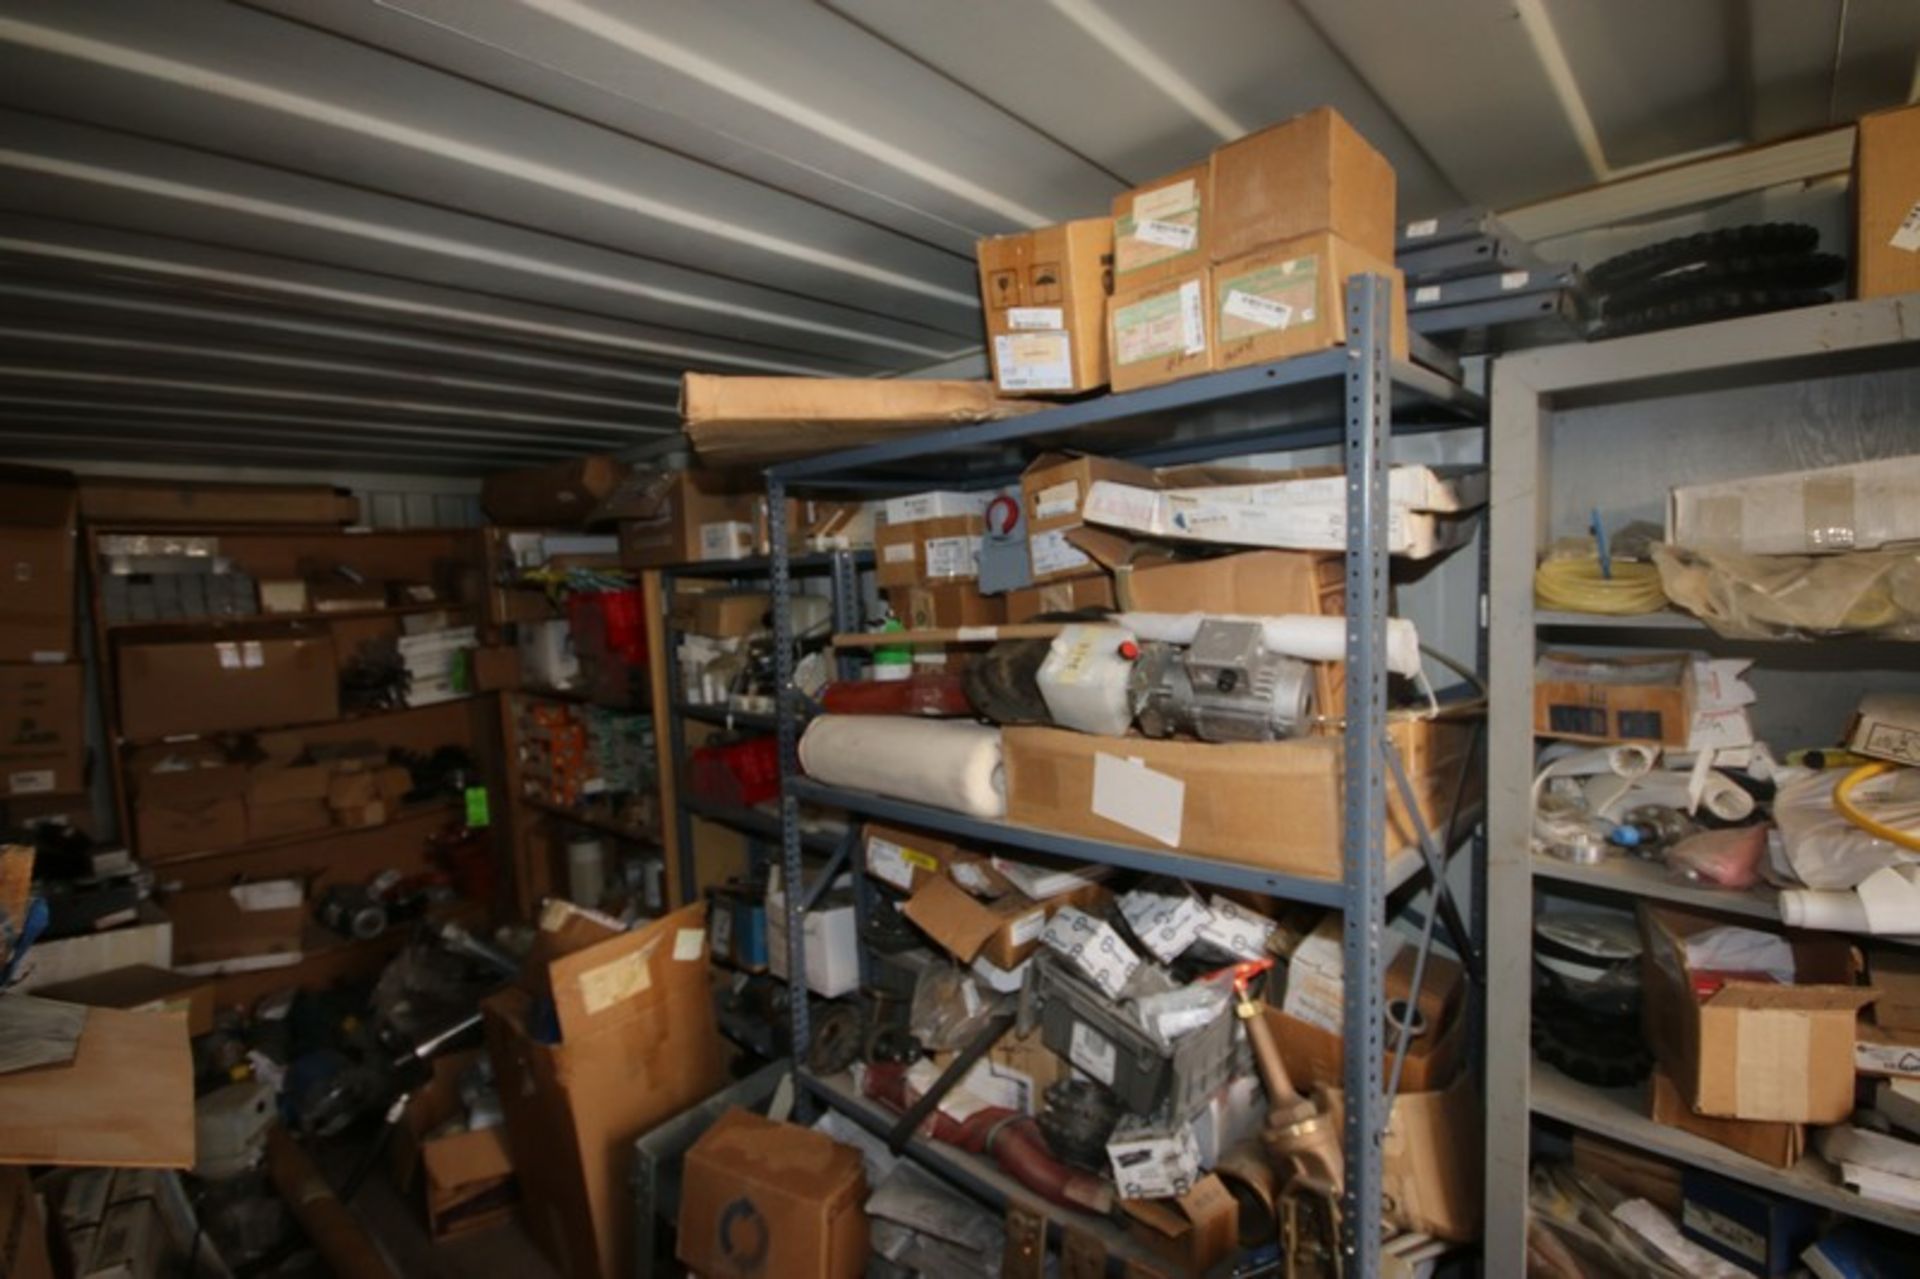 Assorted Spare Parts on 4-Shelving Units, Includes Sprockets, Gauges, Valves, Bearings, Motors, - Image 3 of 17